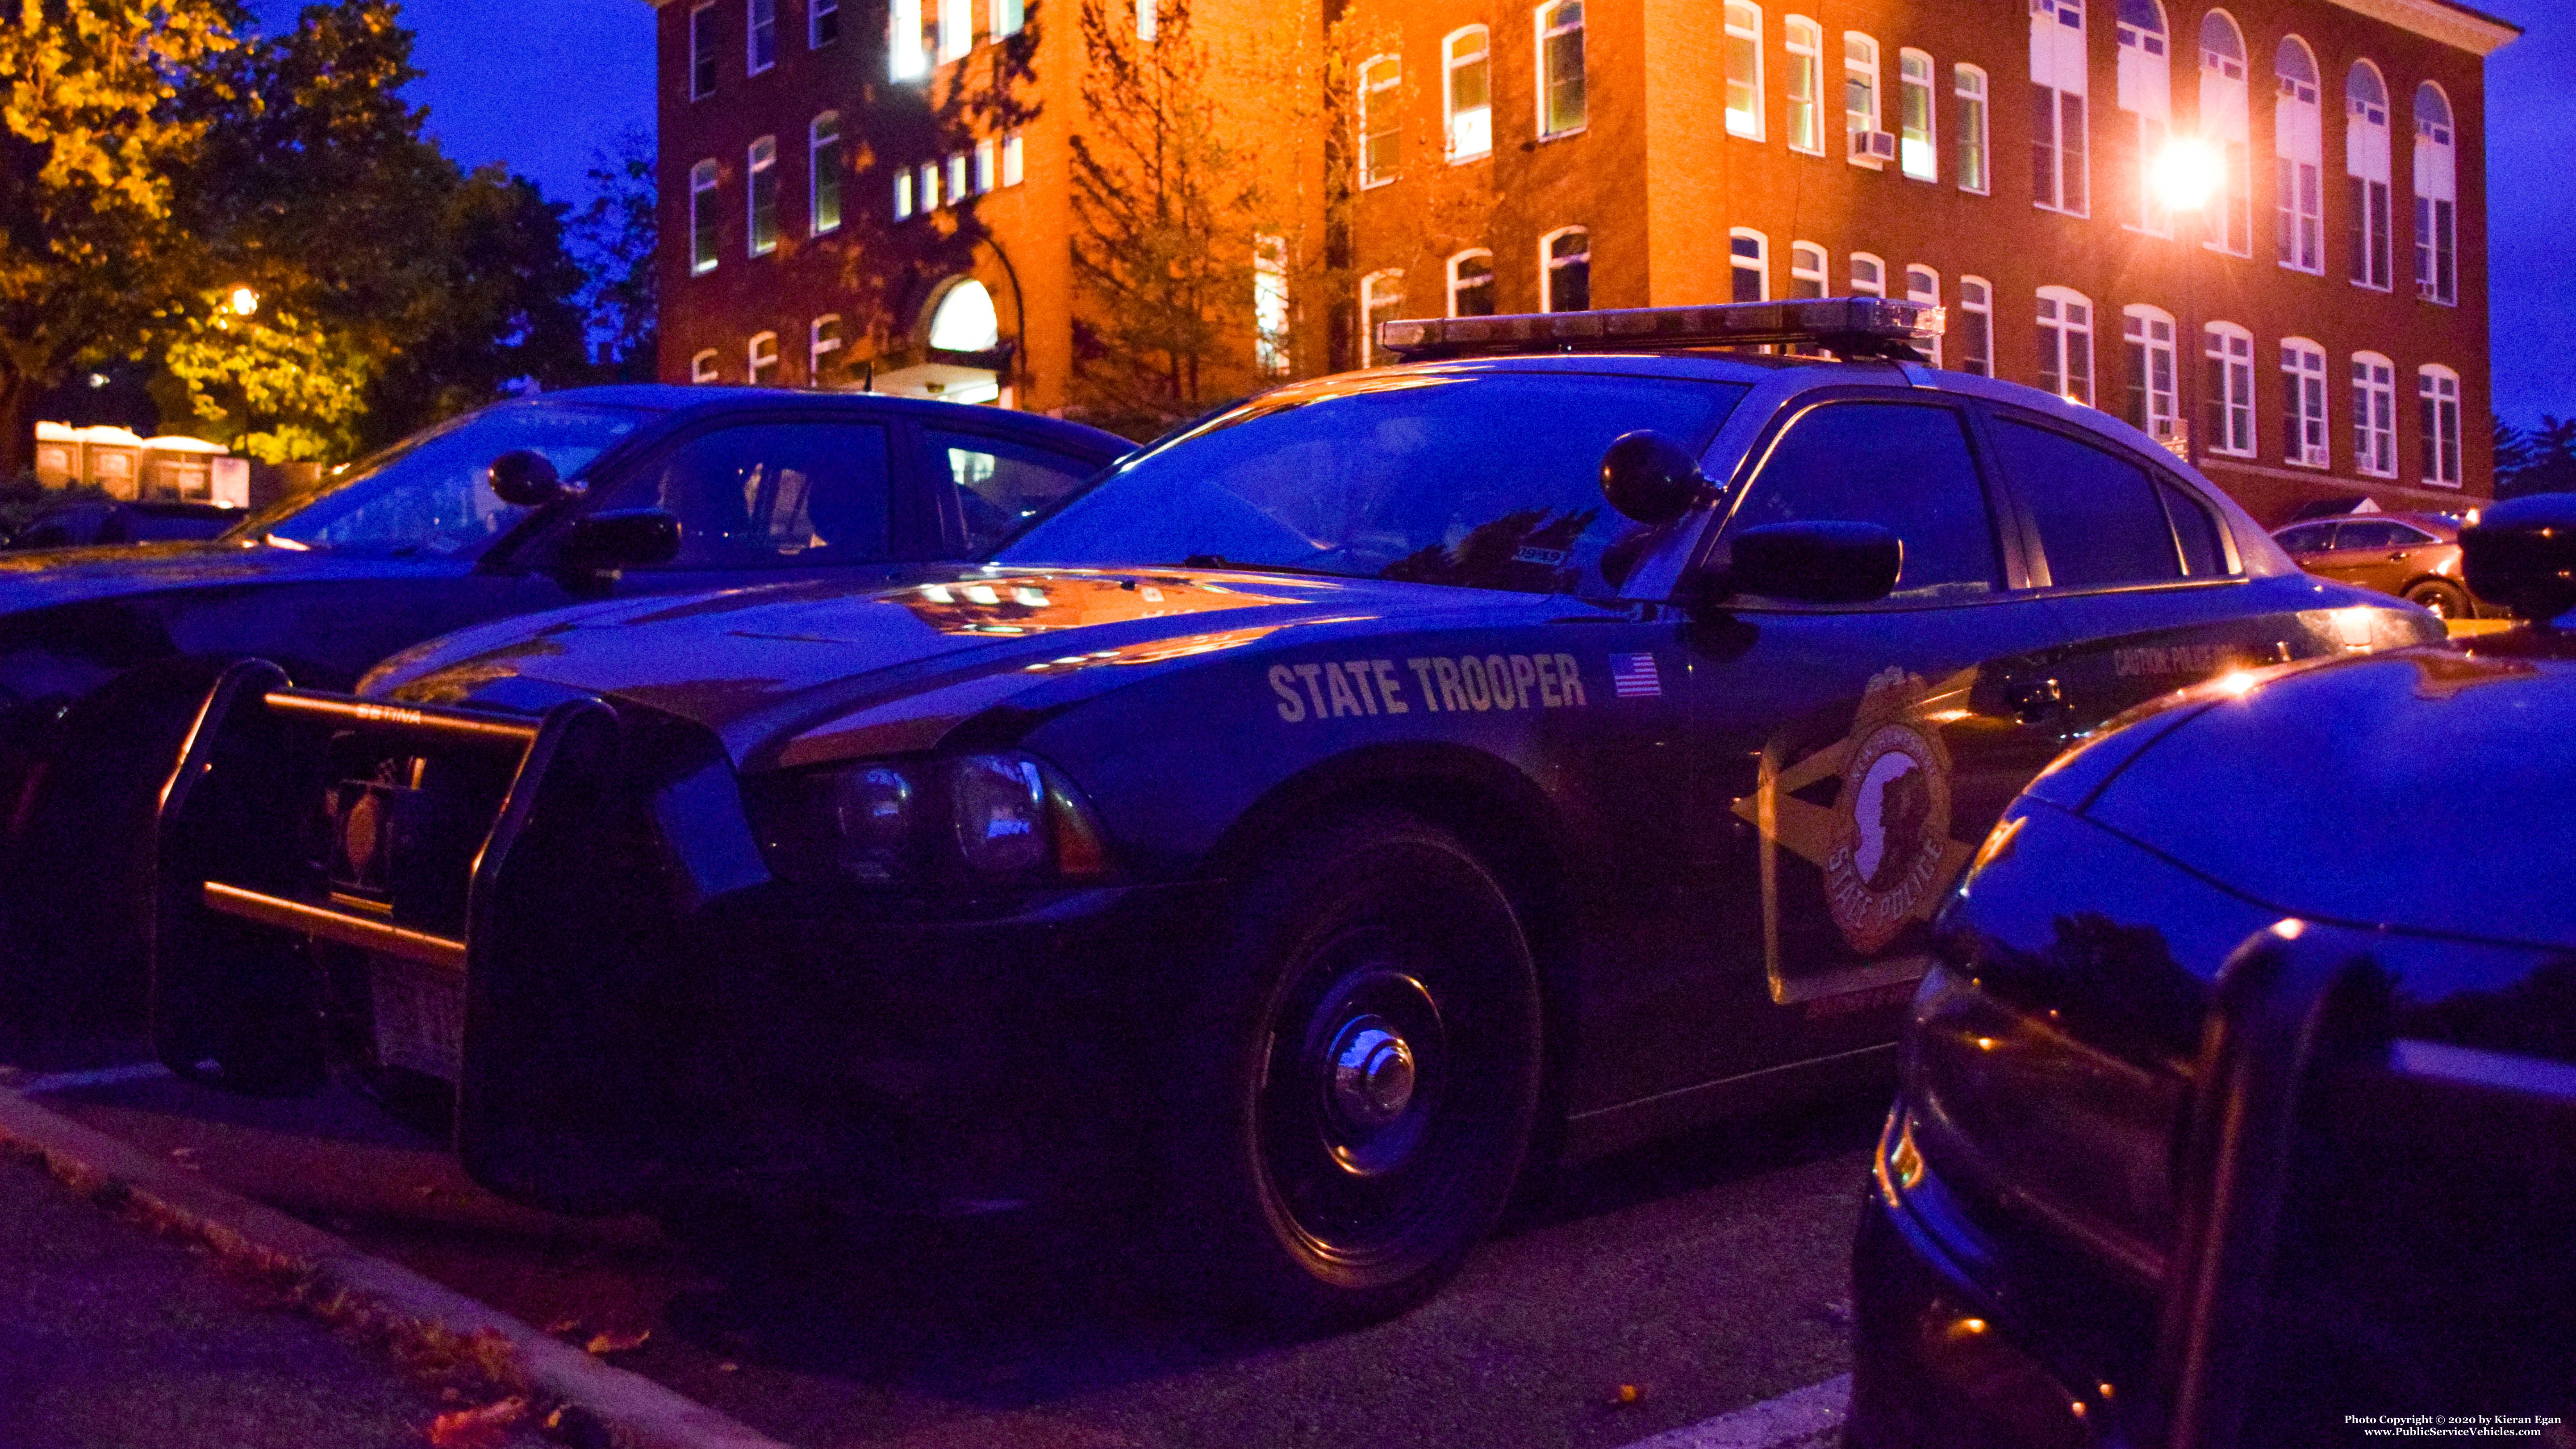 A photo  of New Hampshire State Police
            Cruiser 915, a 2011-2014 Dodge Charger             taken by Kieran Egan